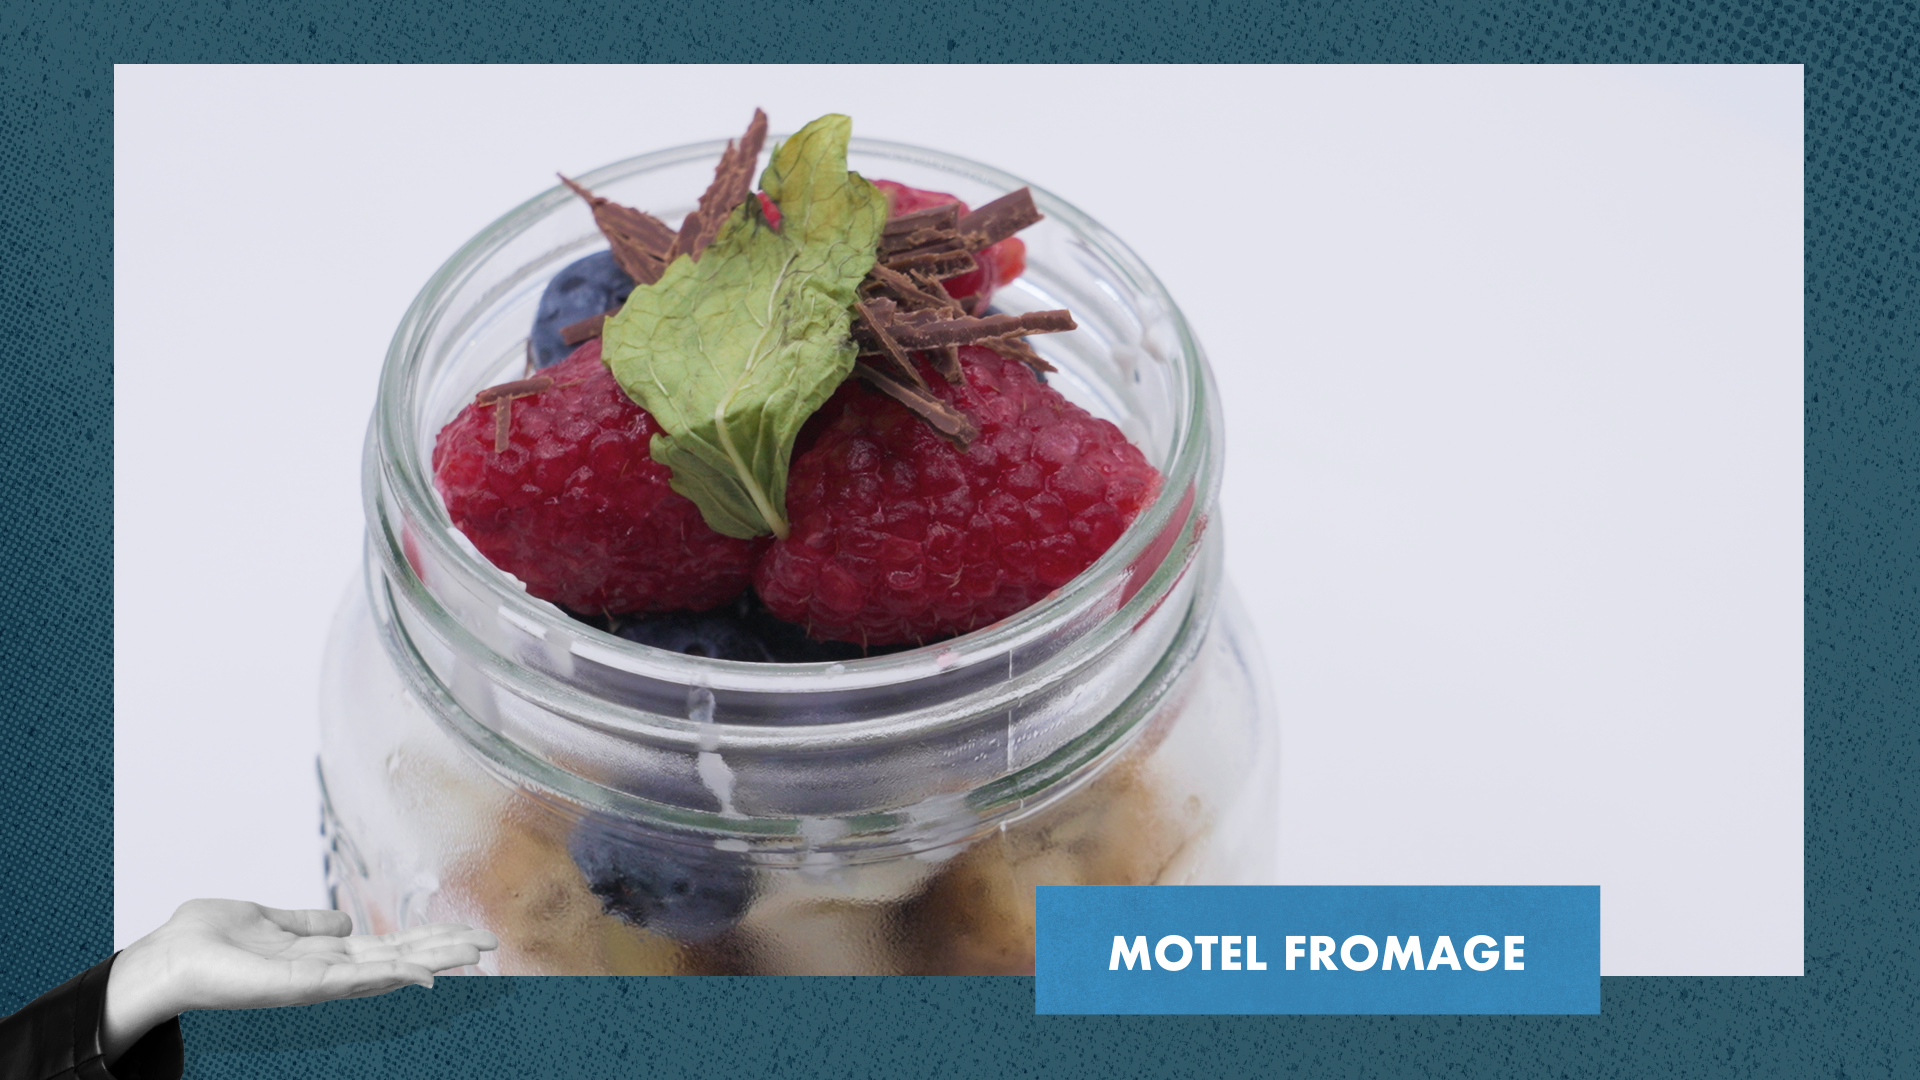 Motel Fromage